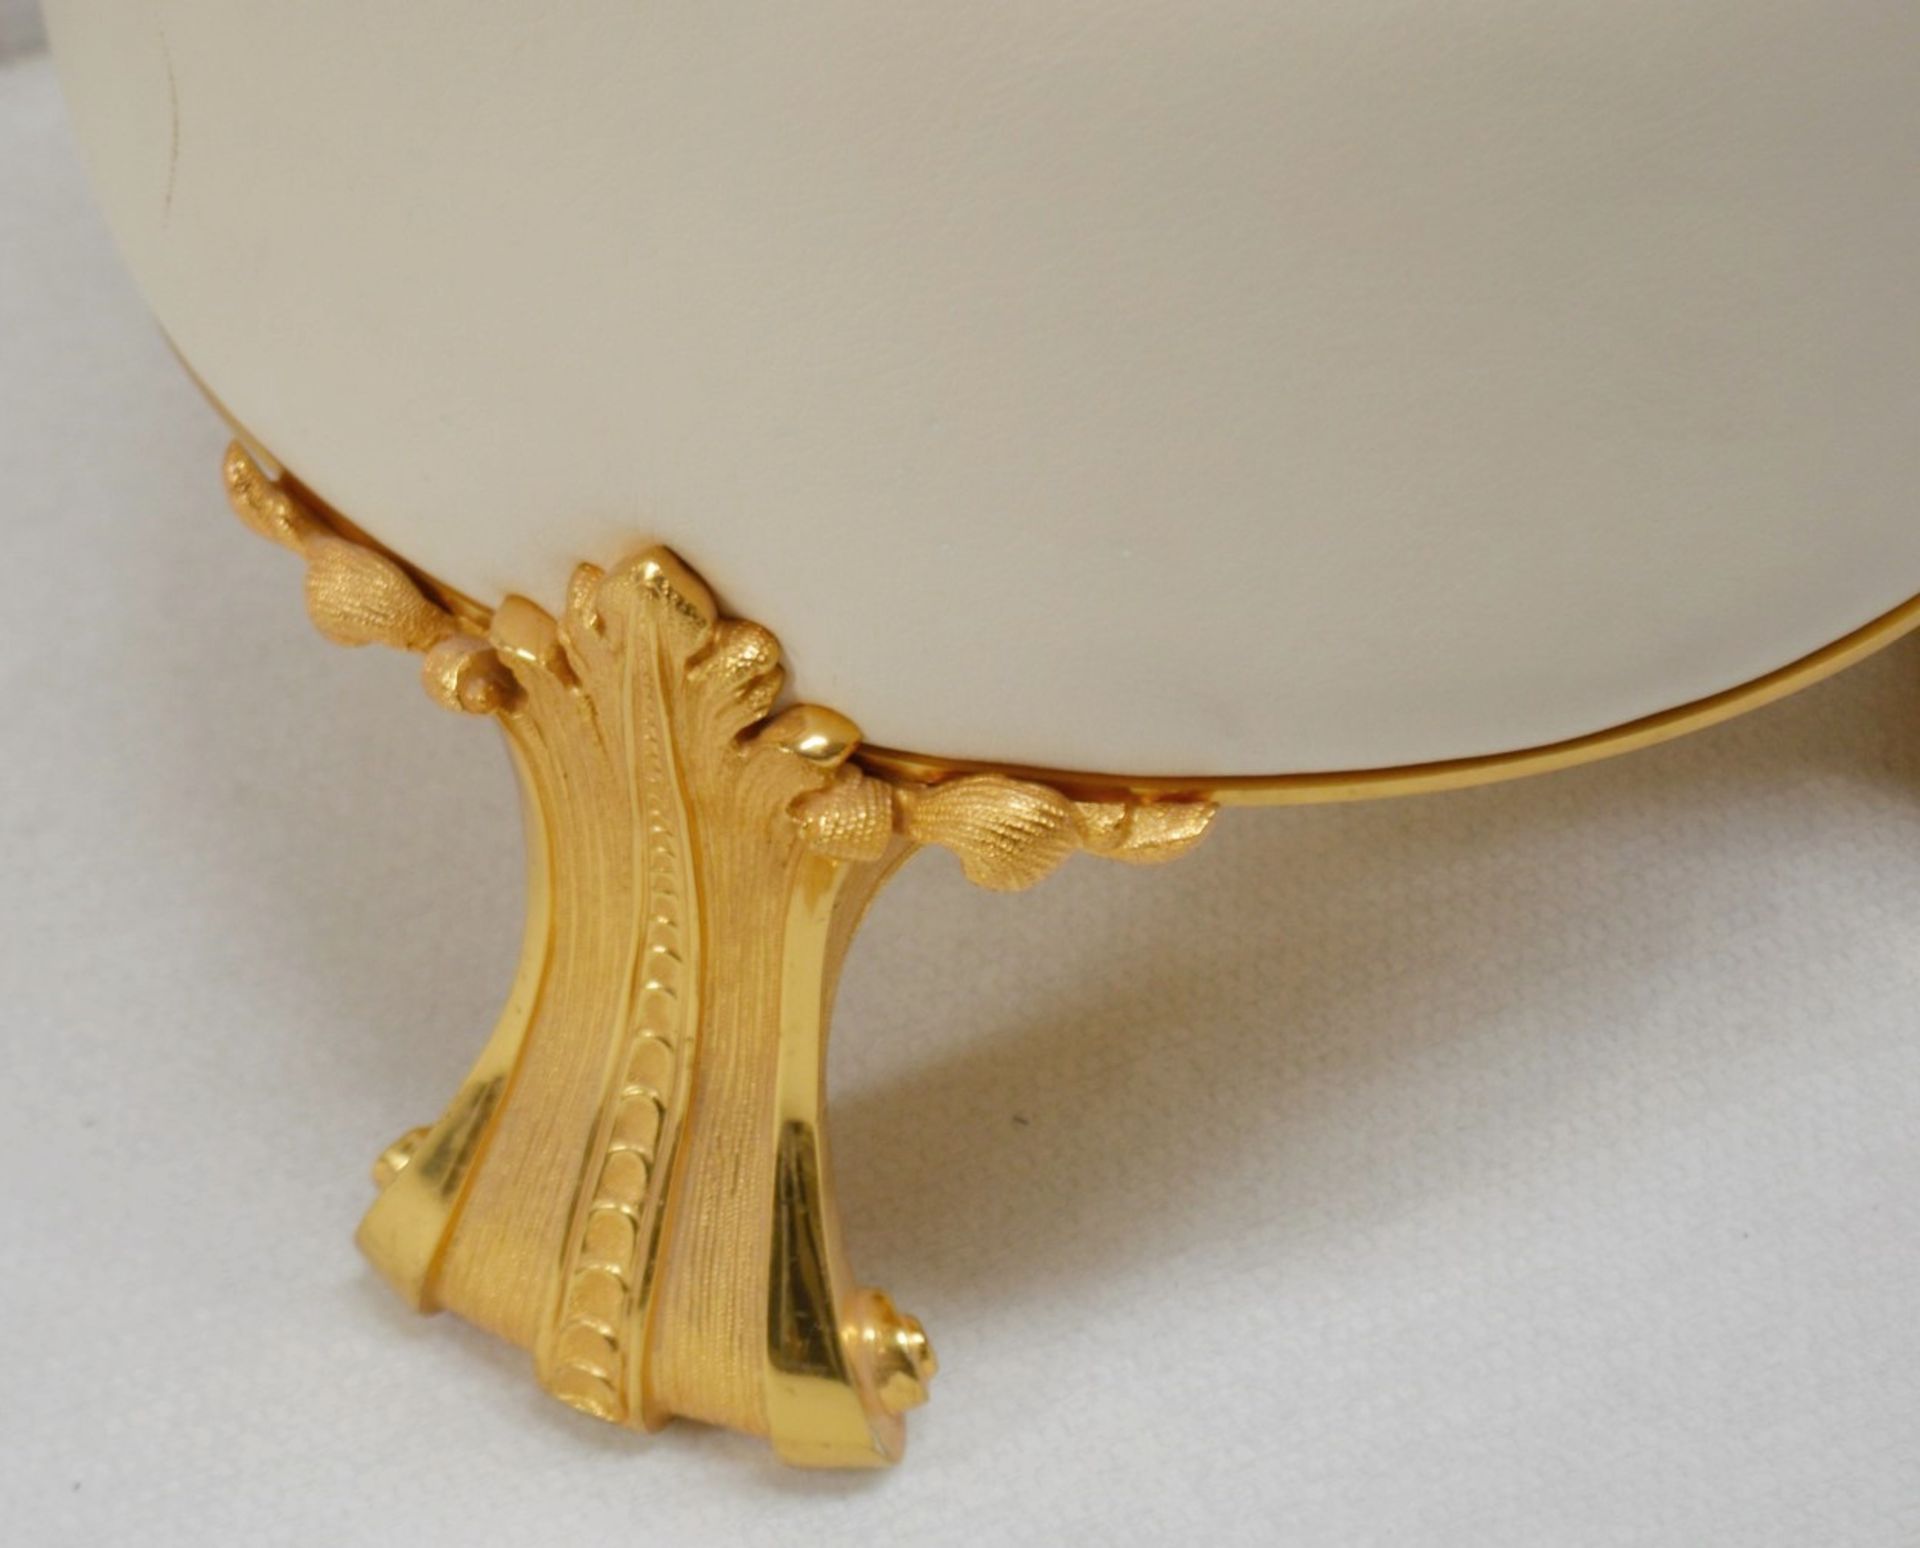 1 x BALDI Luxury Leather Upholstered Stool In Cream With Ornate Claw Feet In Gold - Italian Made - Image 3 of 8